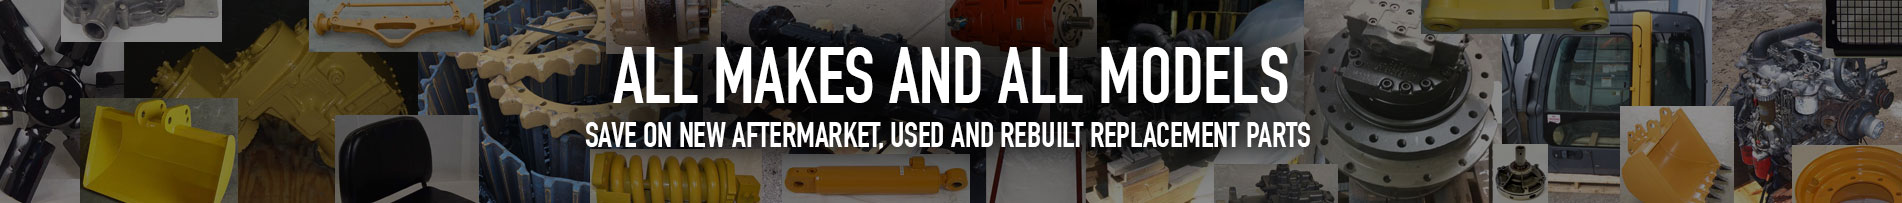 New aftermarket, used and rebuilt heavy equipment replacement parts.